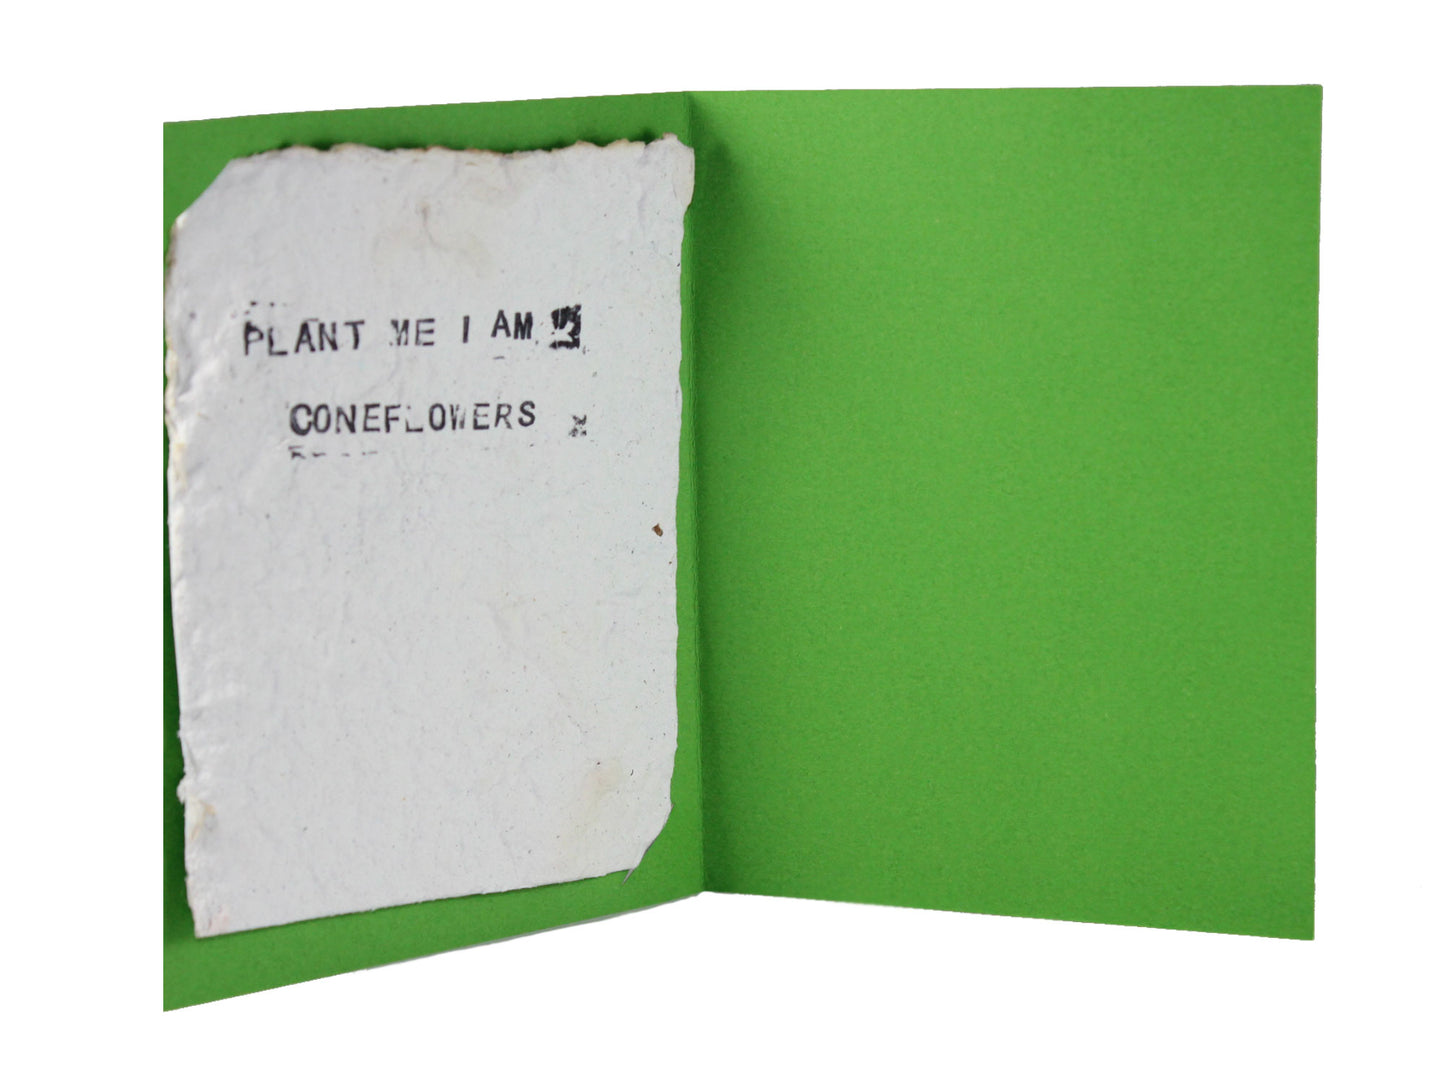 Seed paper card interior with seed paper stamp that says "PLANT ME I AM CONEFLOWERS"